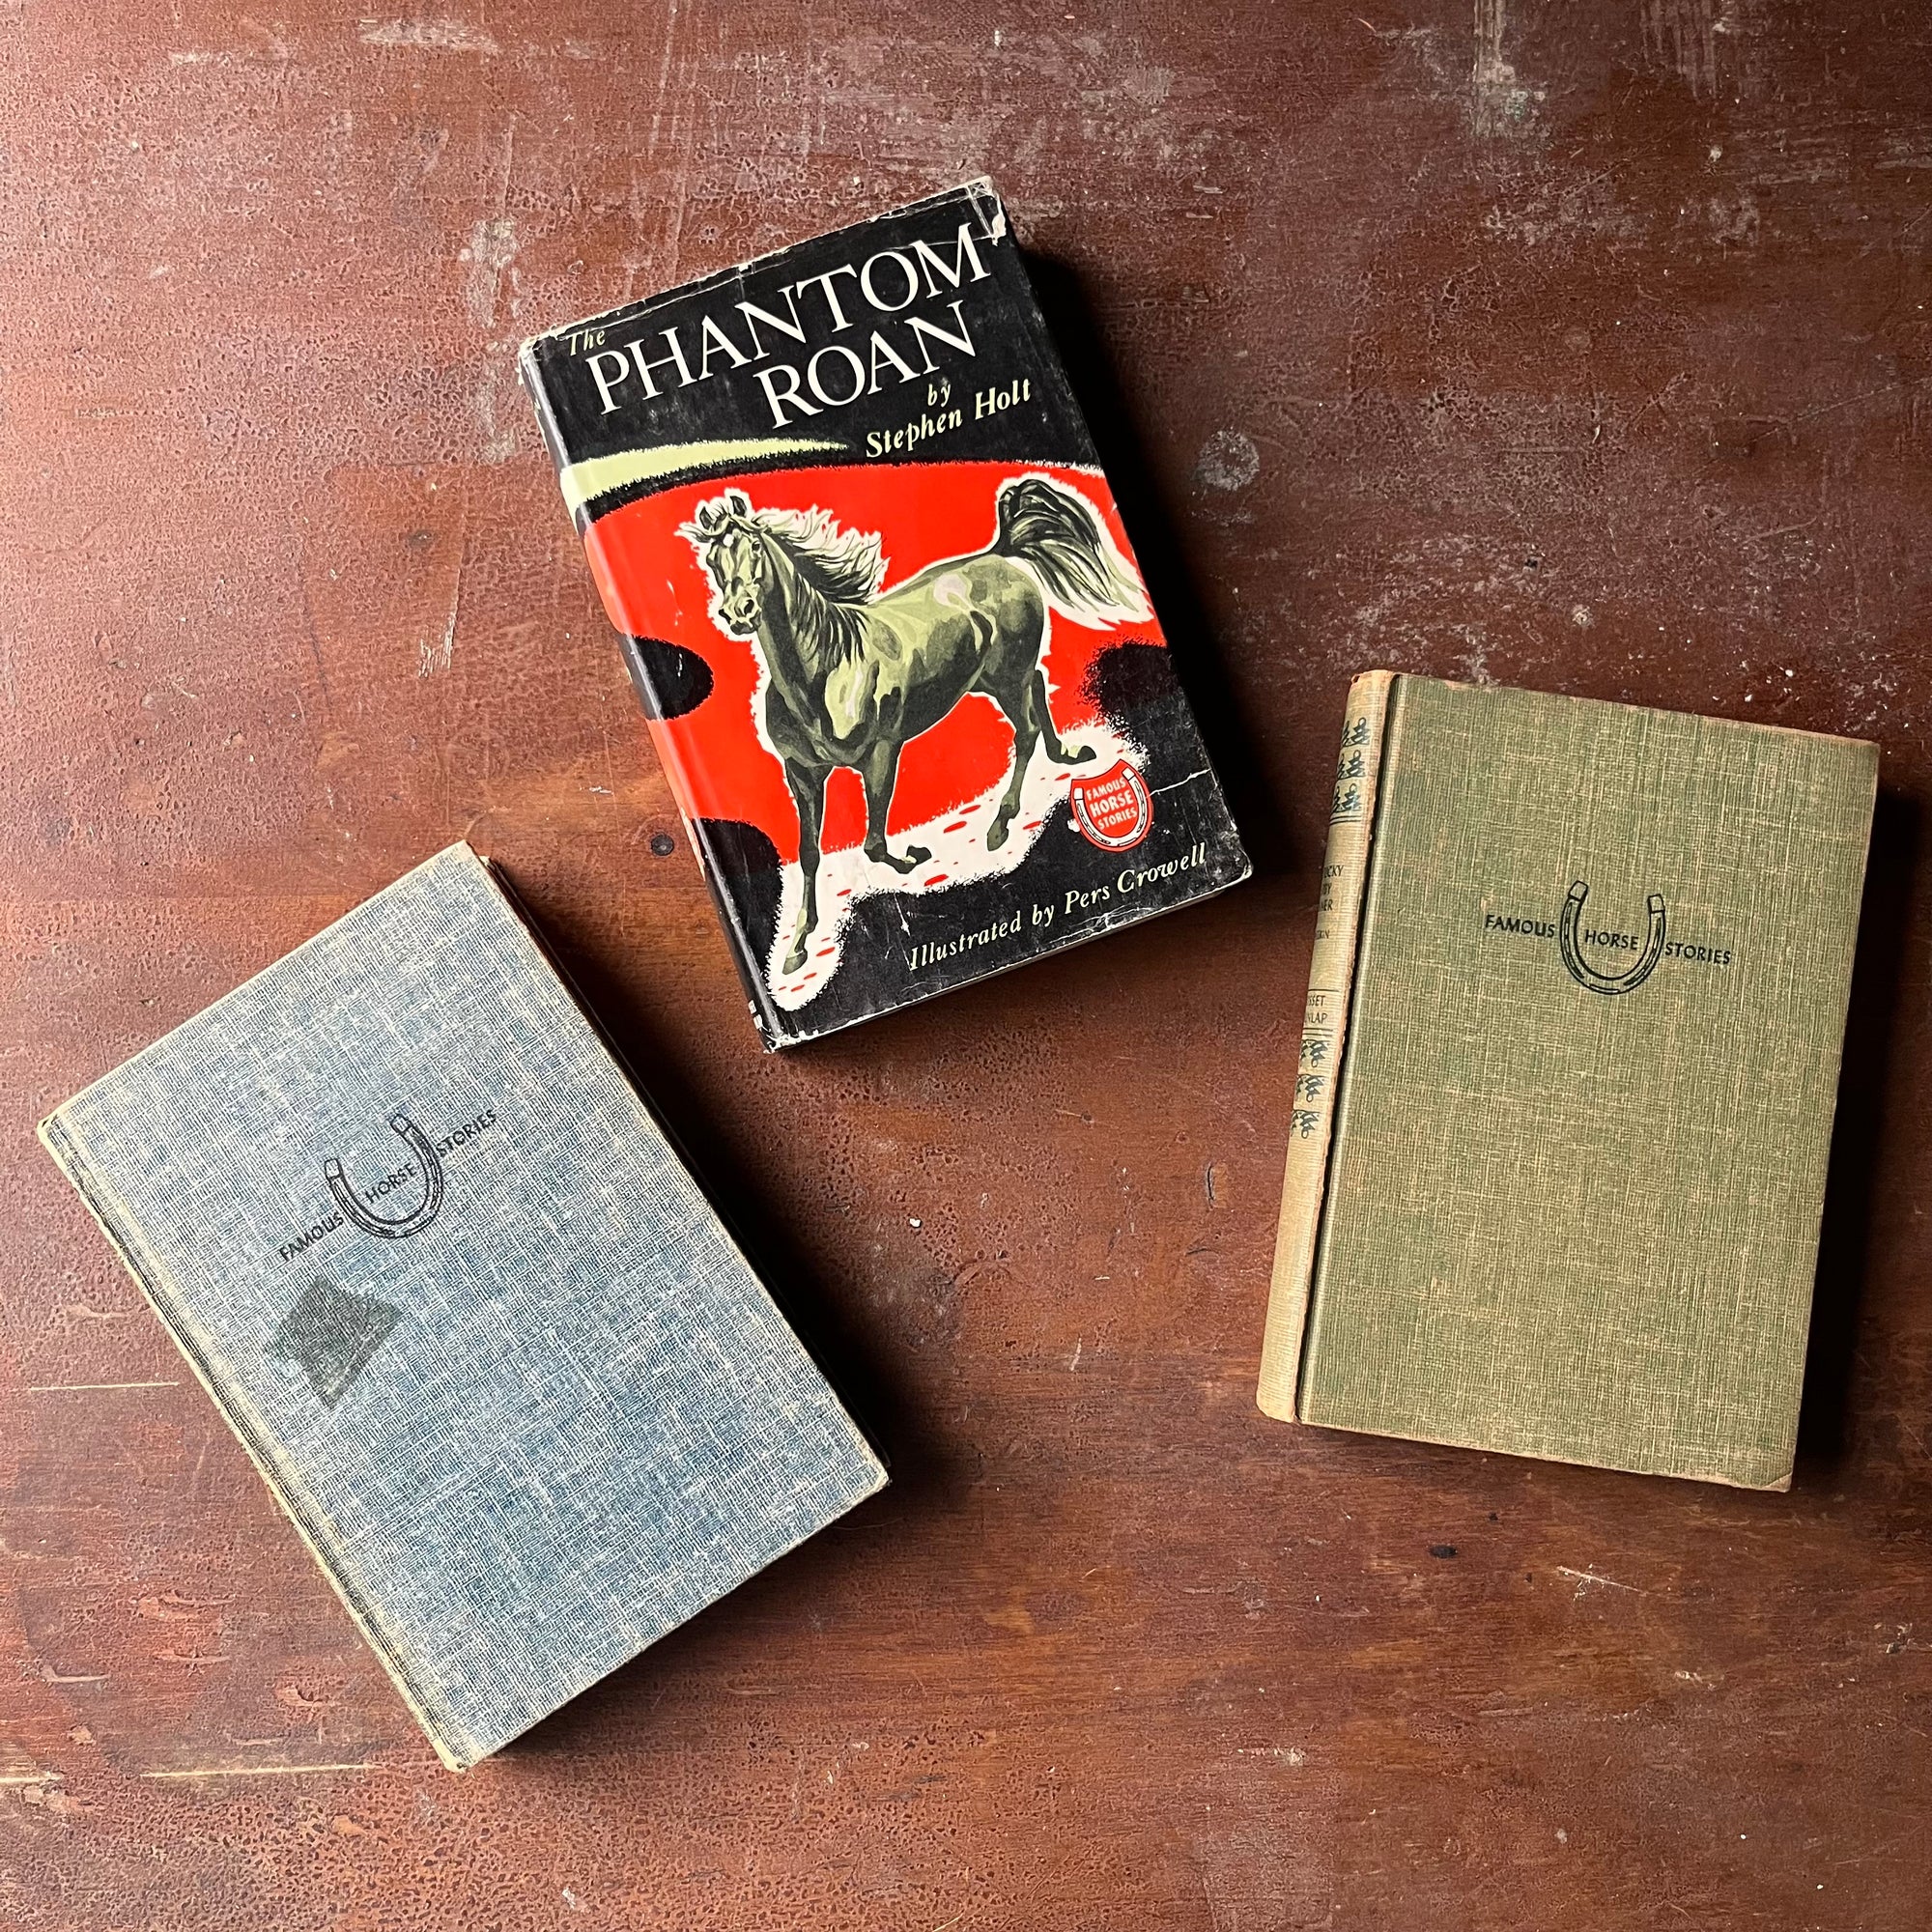 Famous Horse Stories-The Phantom Roan, Chinchfoot & Kentucky Derby Winner-vintage children's chapter books-view of the front covers showing the Famous Horse Stories Emblem & the dust jacket for The Phantom Roan